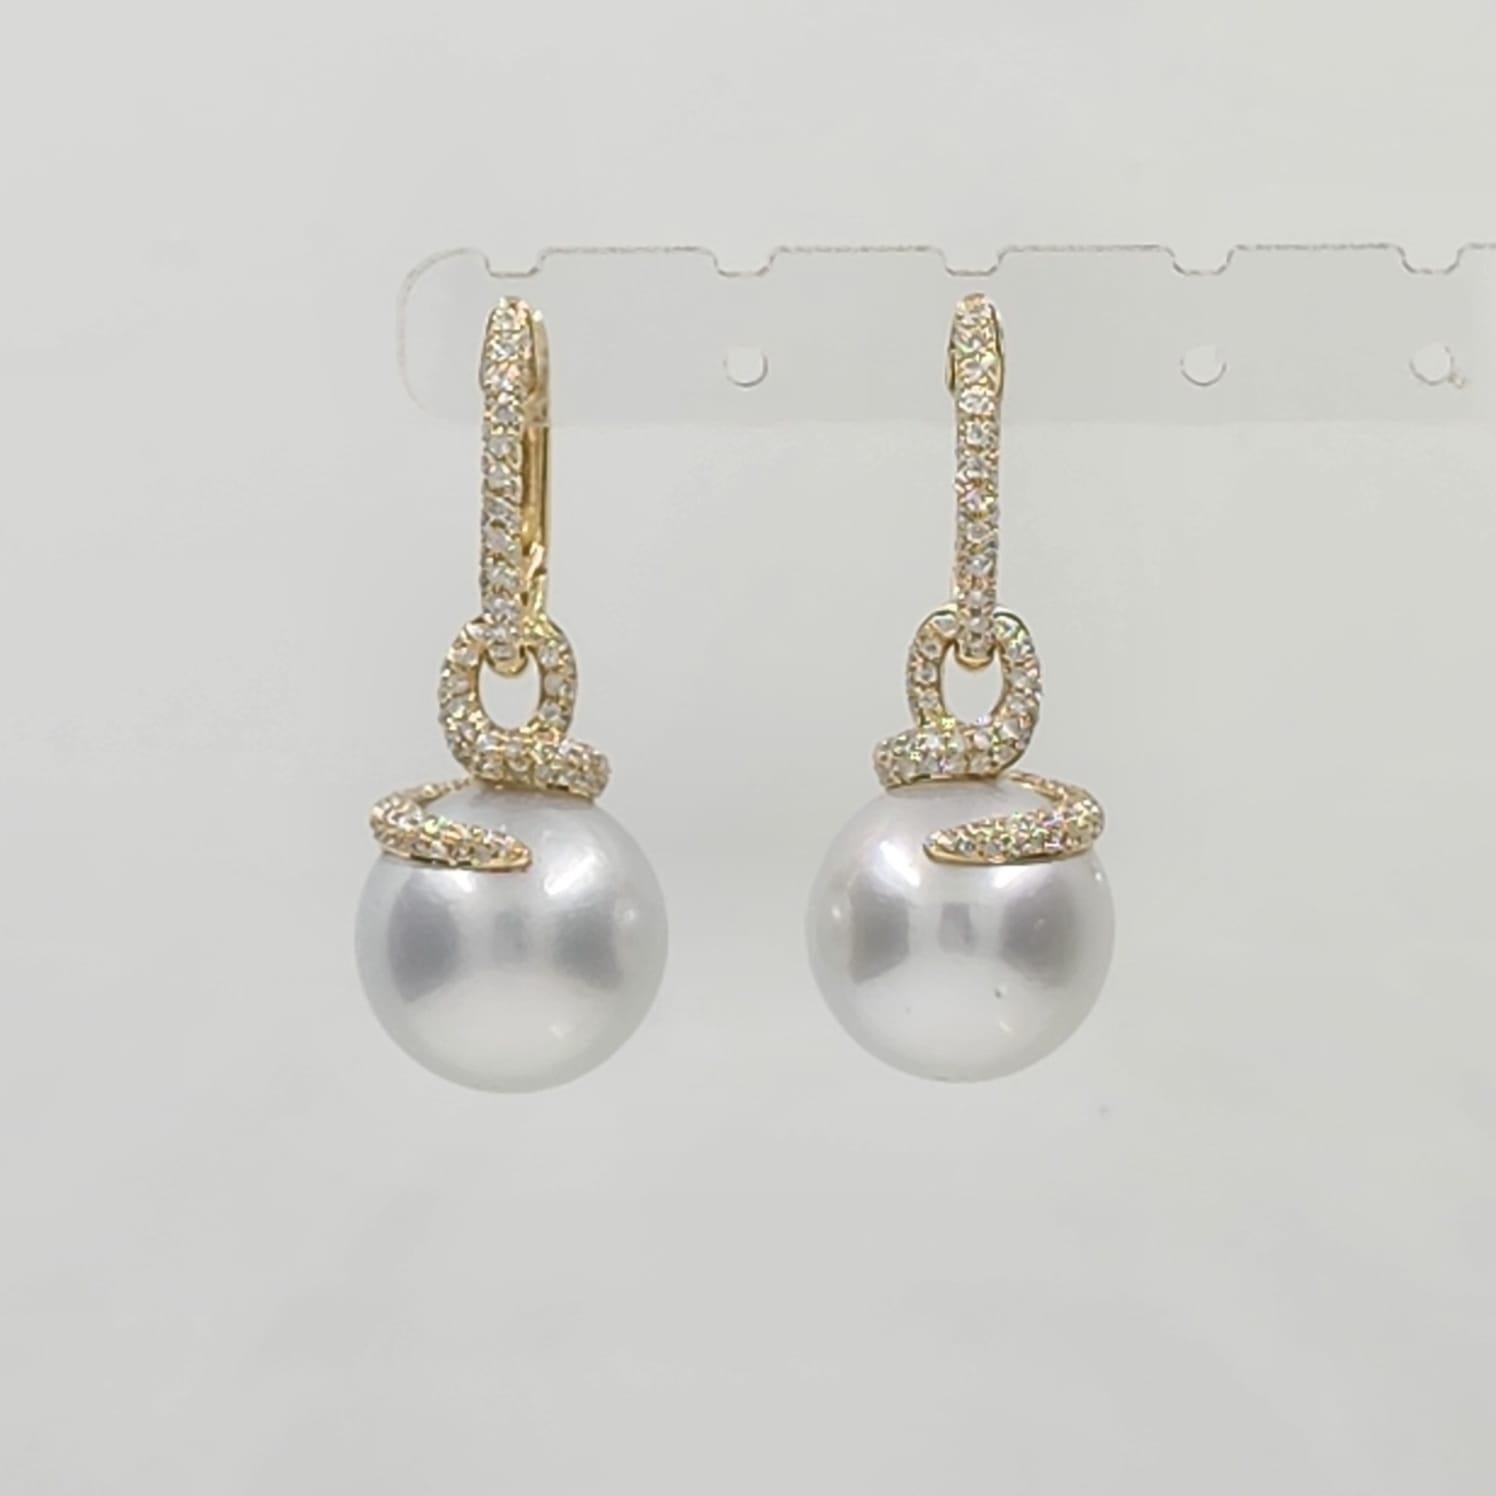 13.5 x 16mm Oval South Sea Pearl Diamond Dangle Earrings in 14 Karat Yellow Gold In New Condition For Sale In Hong Kong, HK